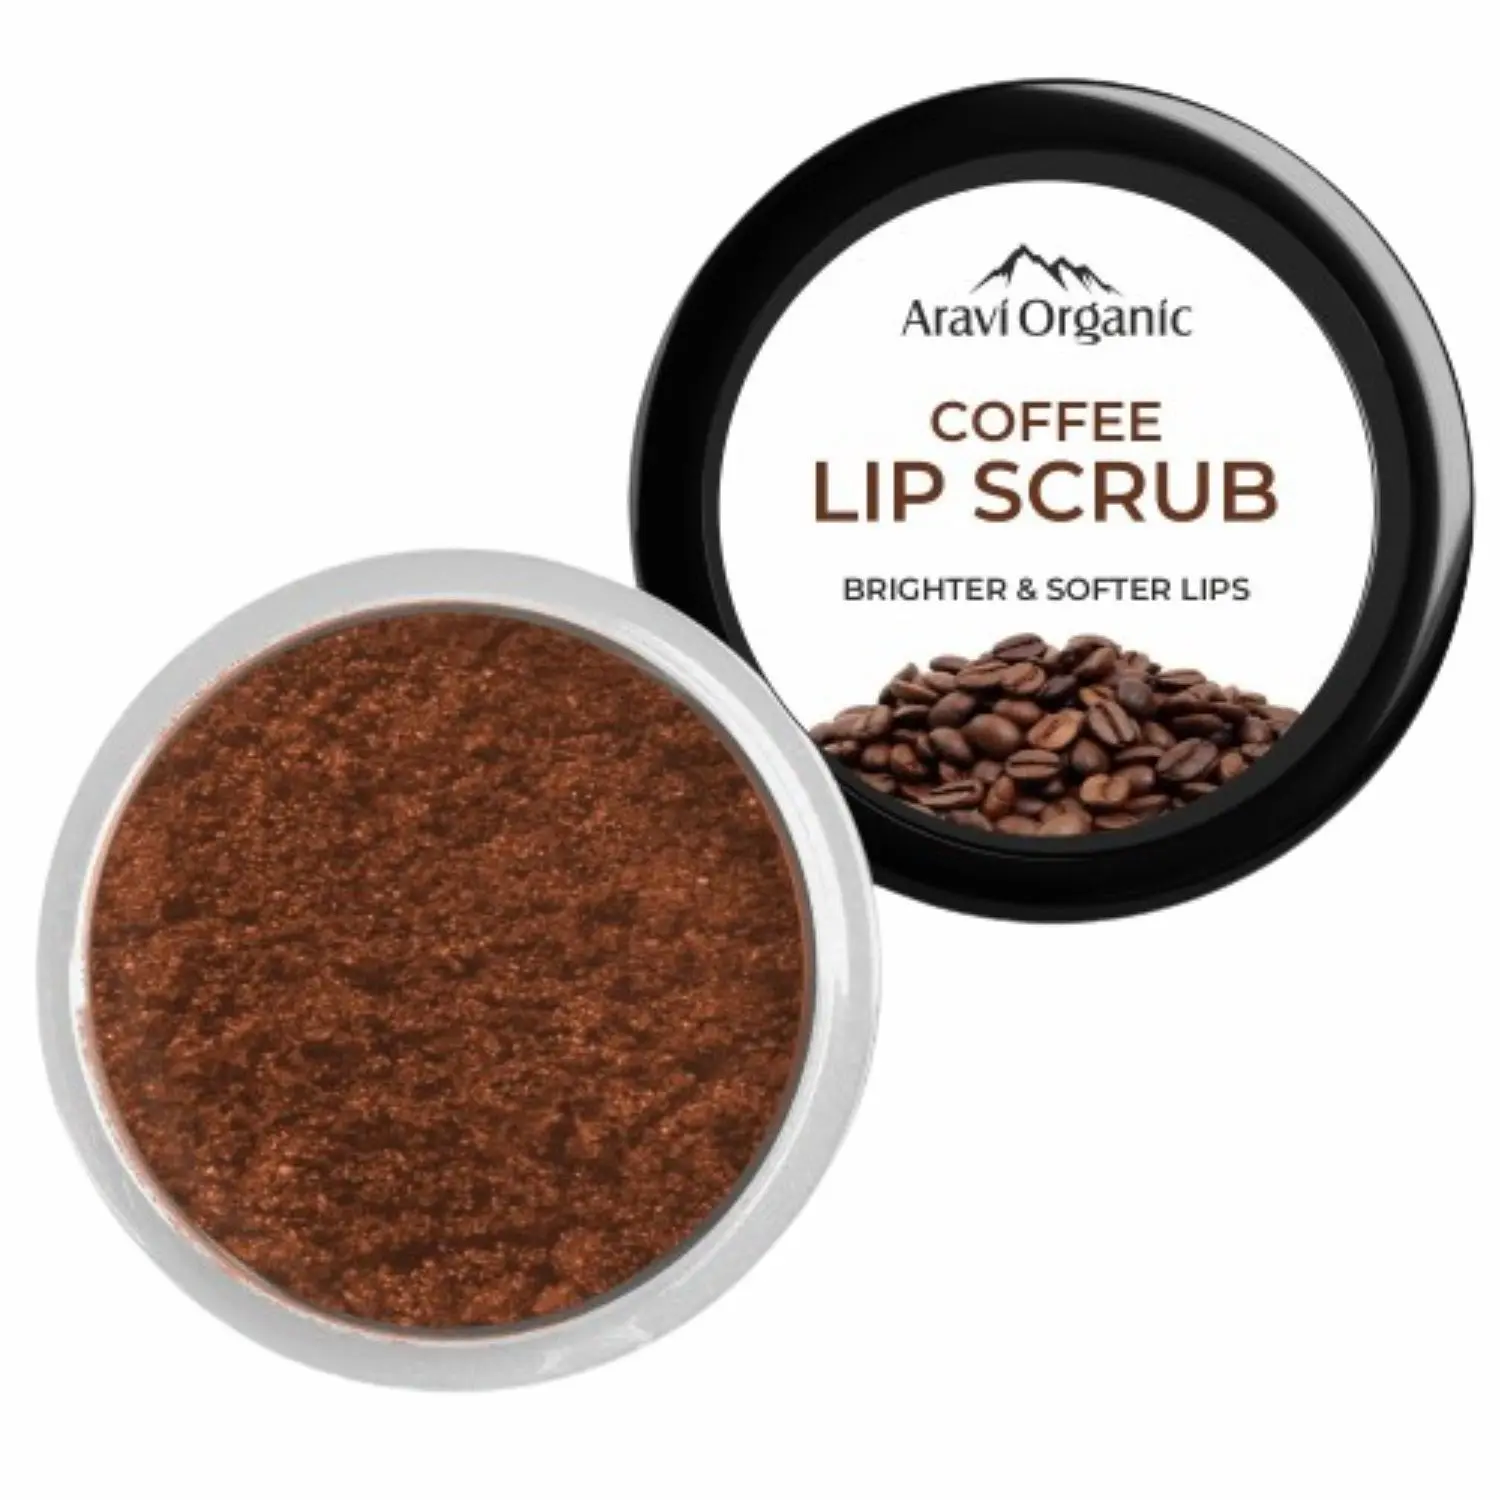 Aravi Organic Coffee Lip Scrub (15g) | with Coffee extracts | for Pigmented Lips, Chapped Lips & Dry Lips | to Nourish, Moisturise & Plump your Lips